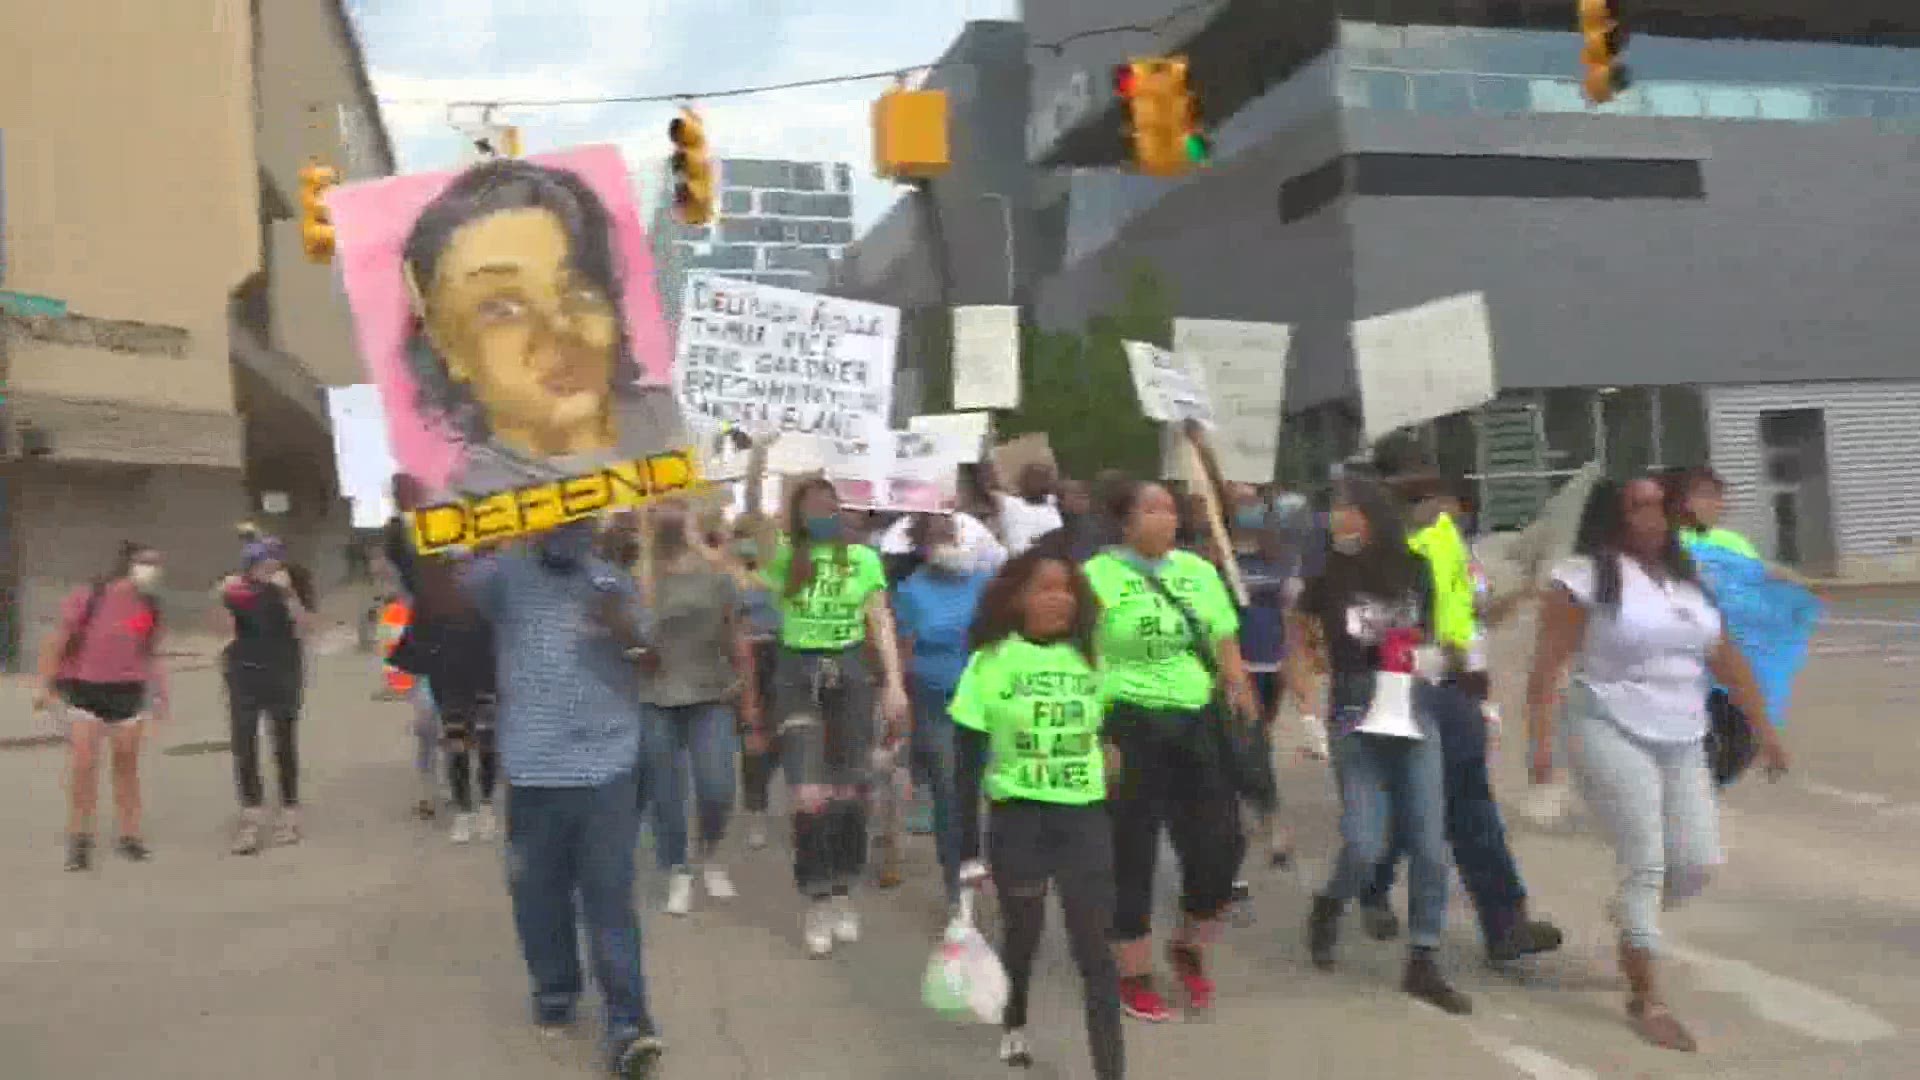 The march started at Rosa Parks Circle.